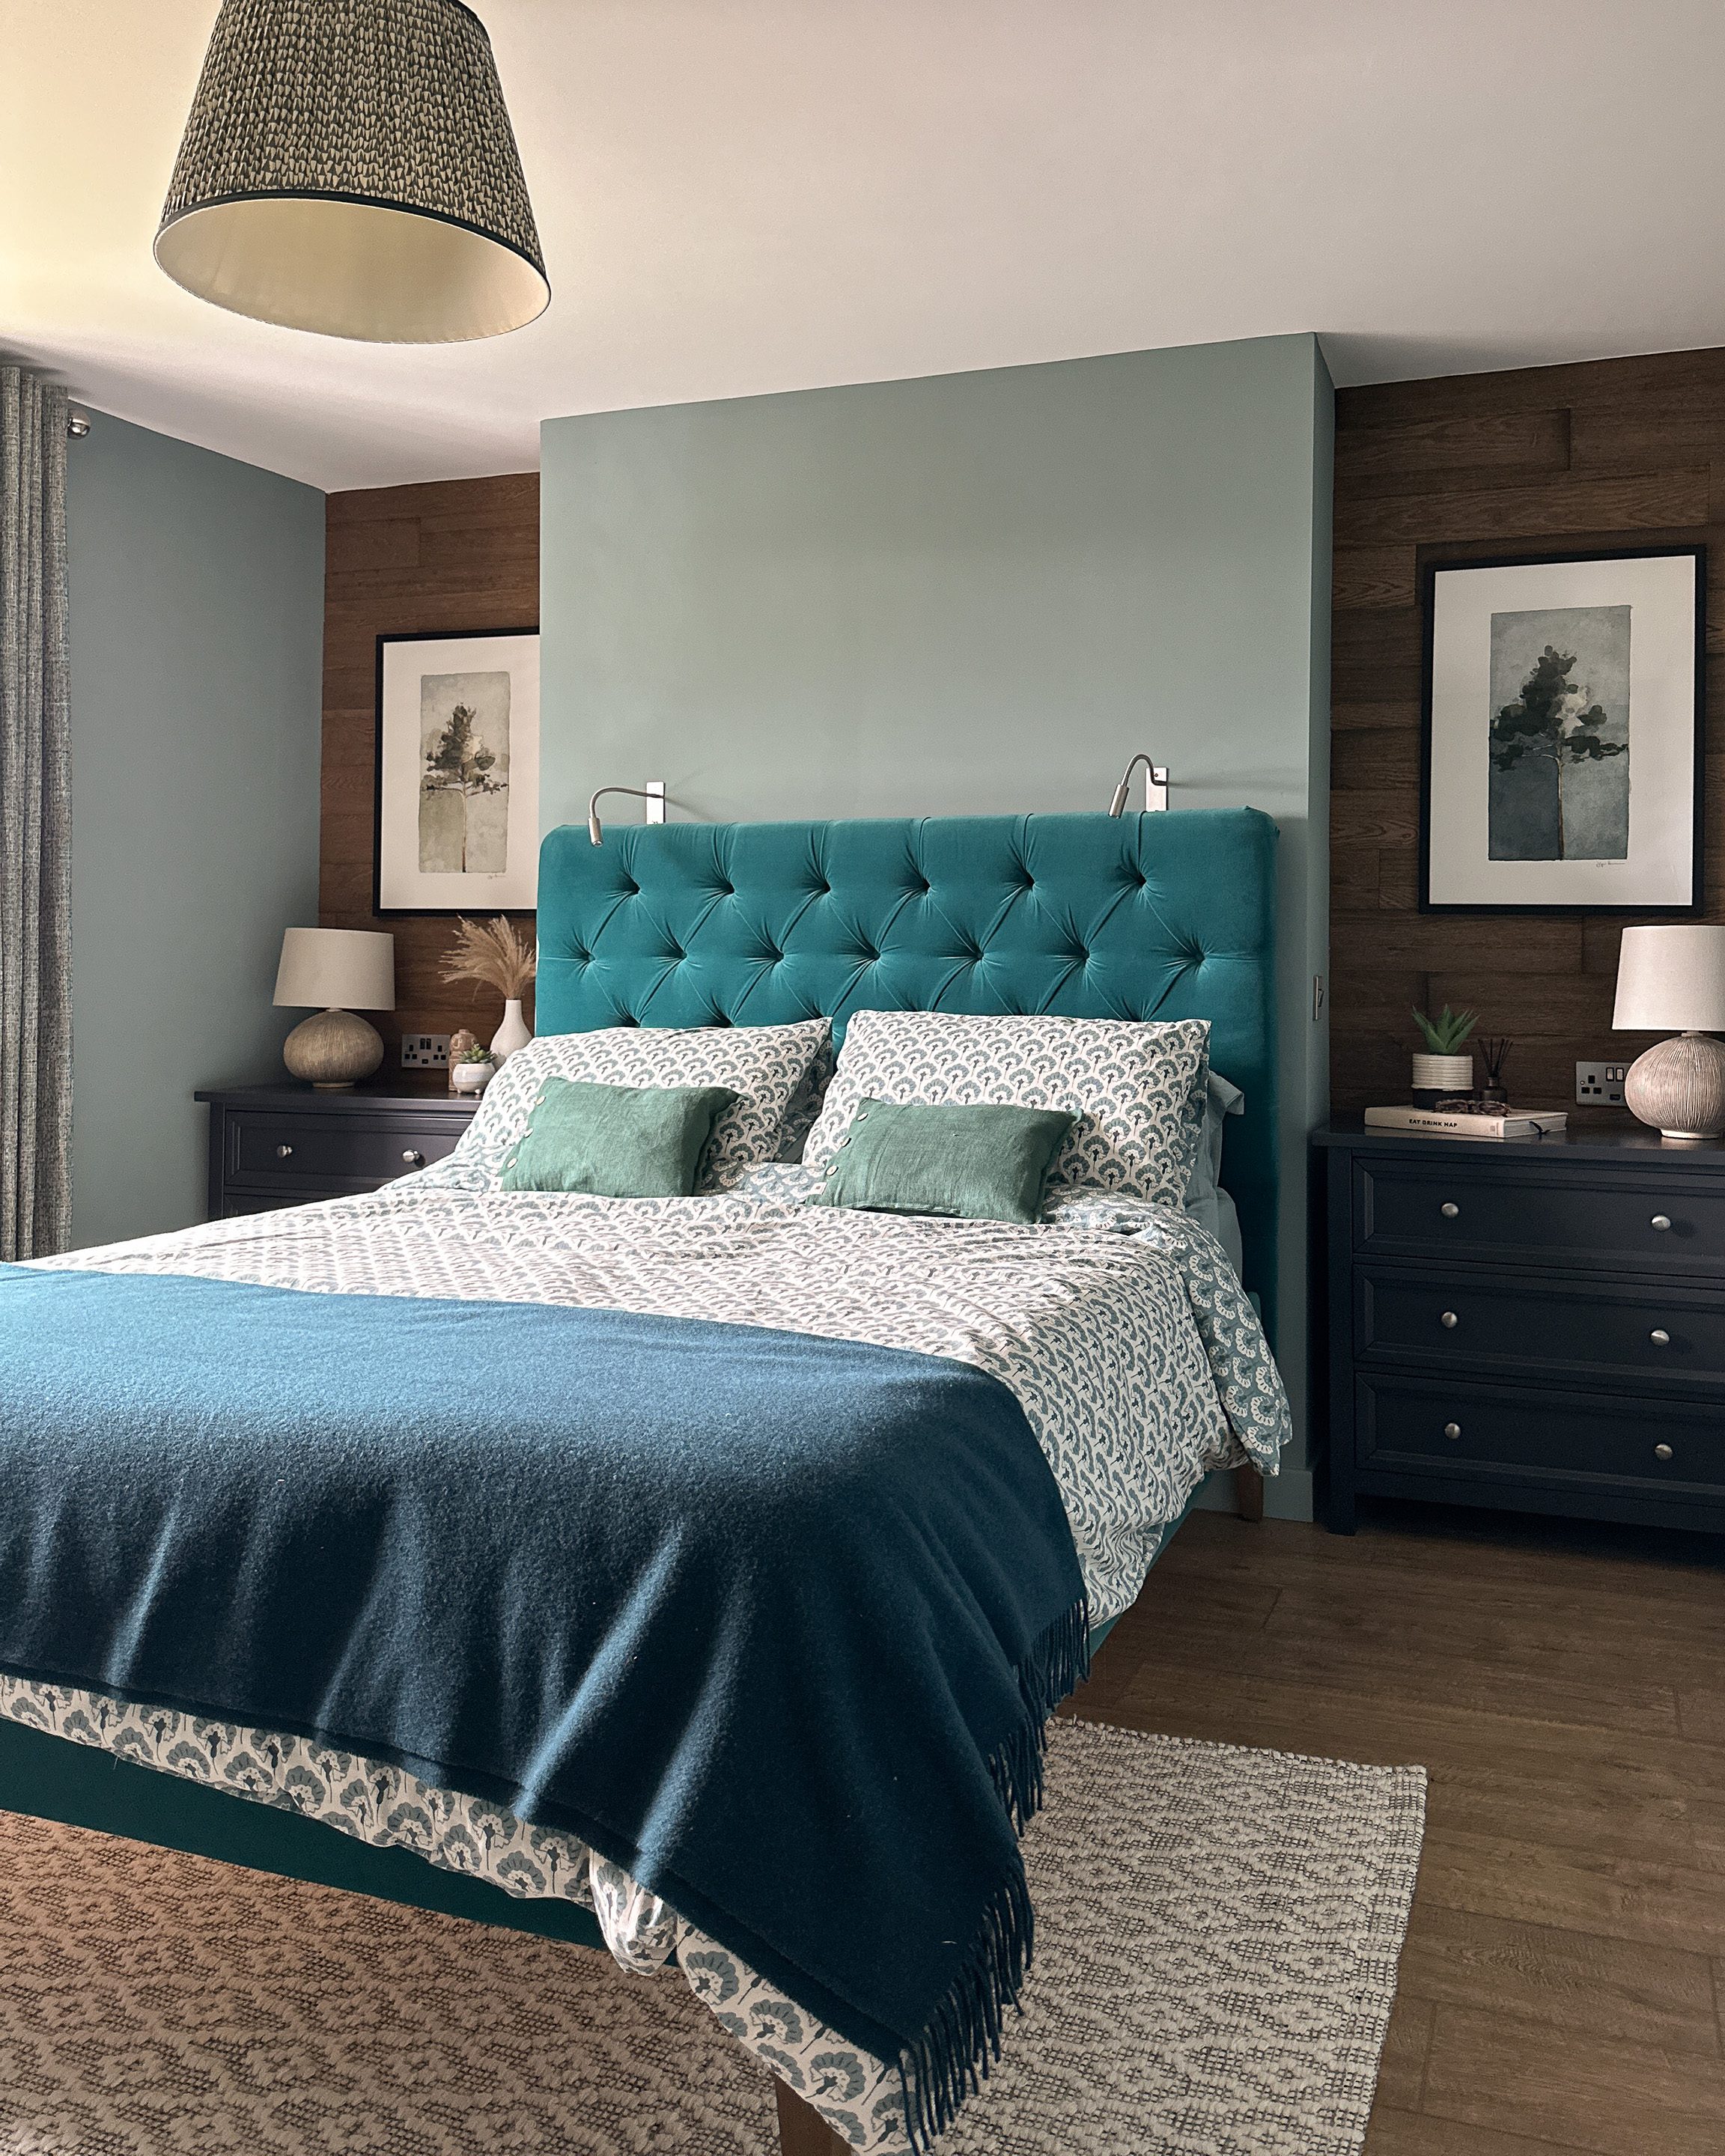 This picture shows a newly refurbished bedroom, where the fireplace has been extended to create a space for the Teal Velvet Headboard. The recesses have been panelled in Rustic Wood and the walls are painted in Farrow and Ball Oval Room Blue.